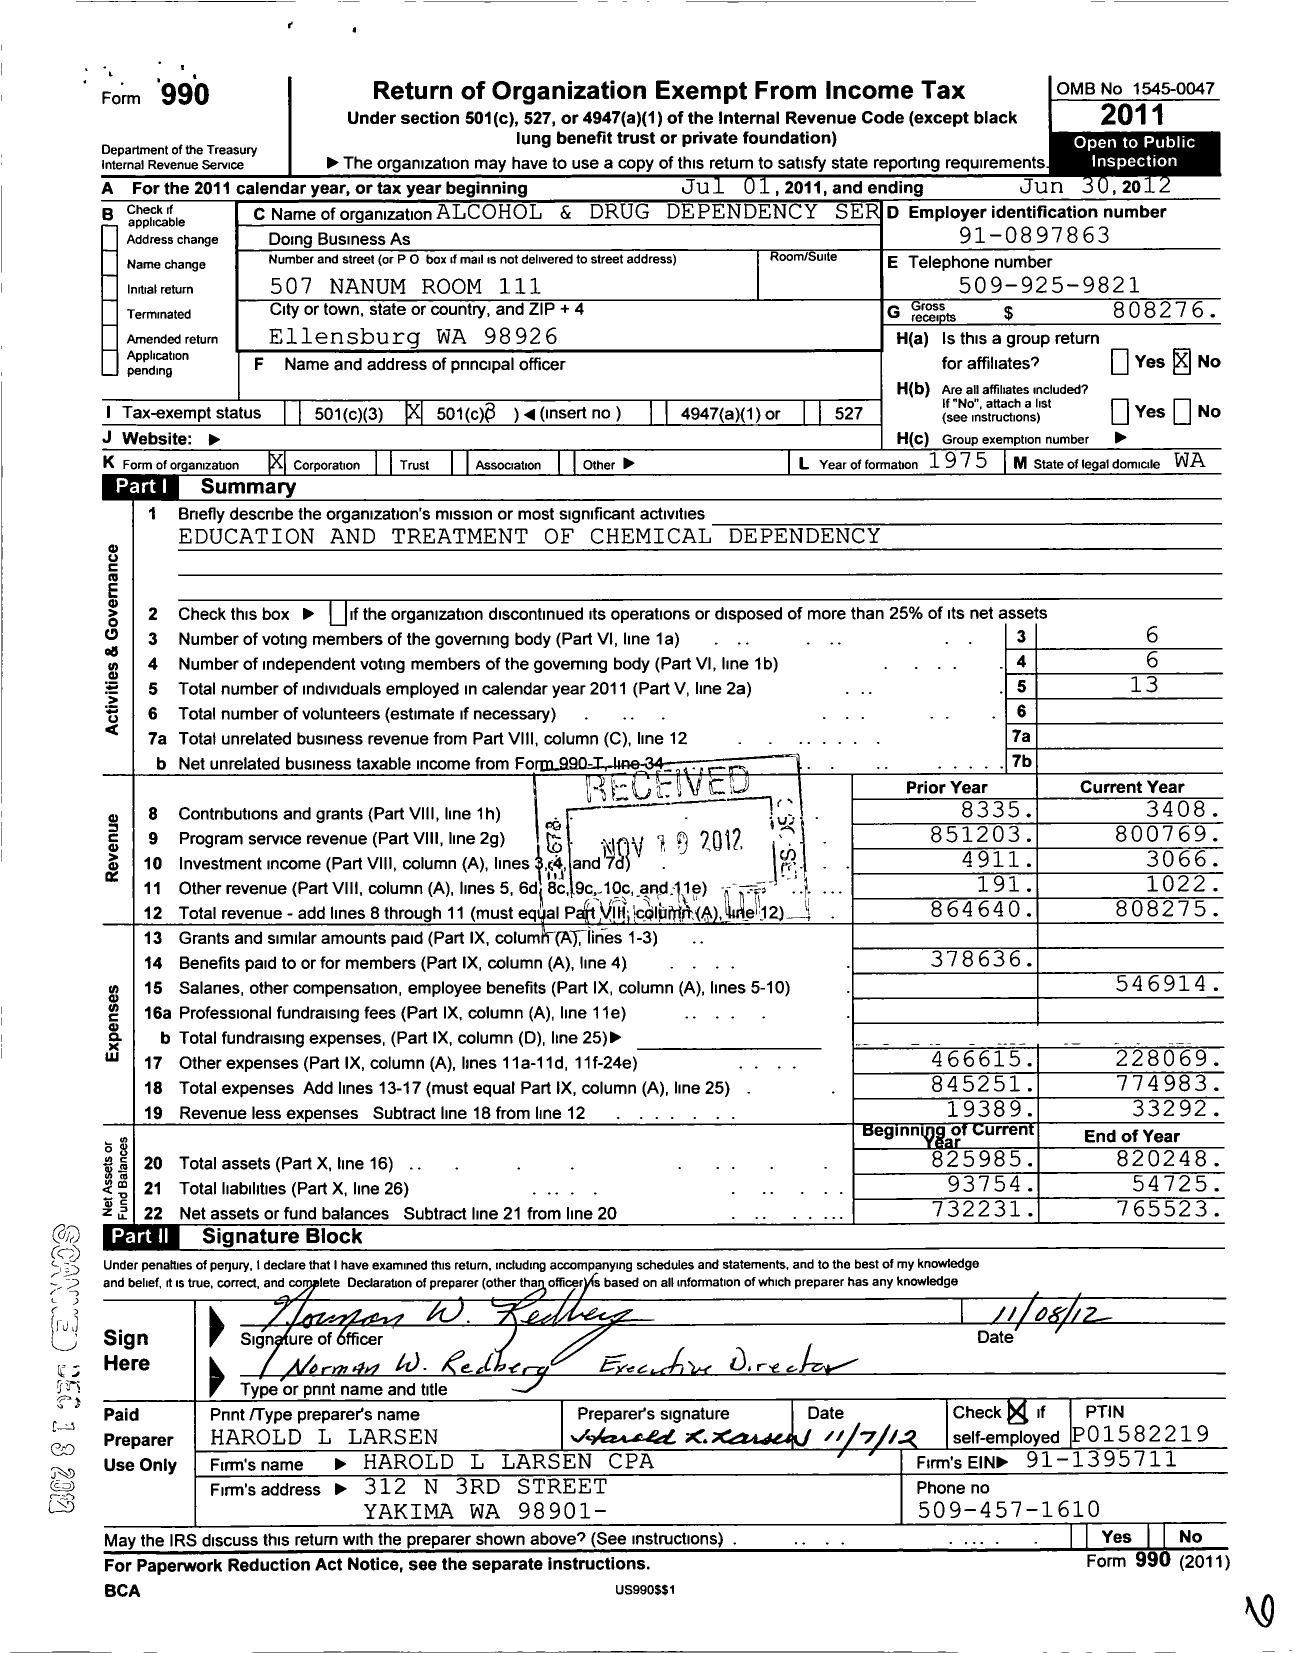 Image of first page of 2011 Form 990 for Alcohol and Drug Dependency Services